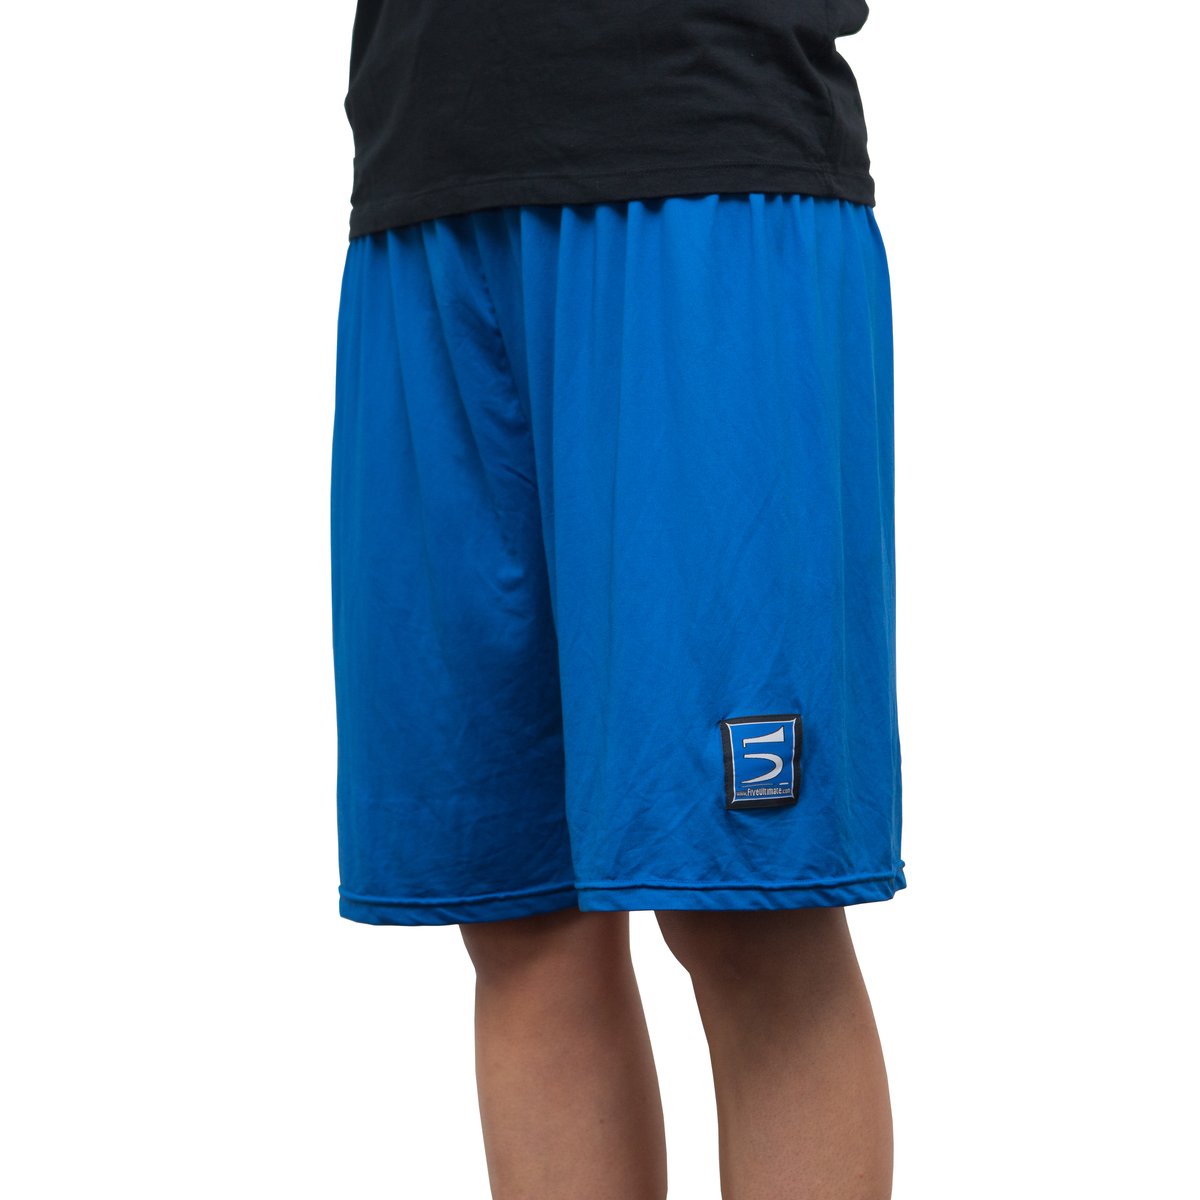 Image of 5 Colours of Plain Five Ultimate Hydro Shorts 